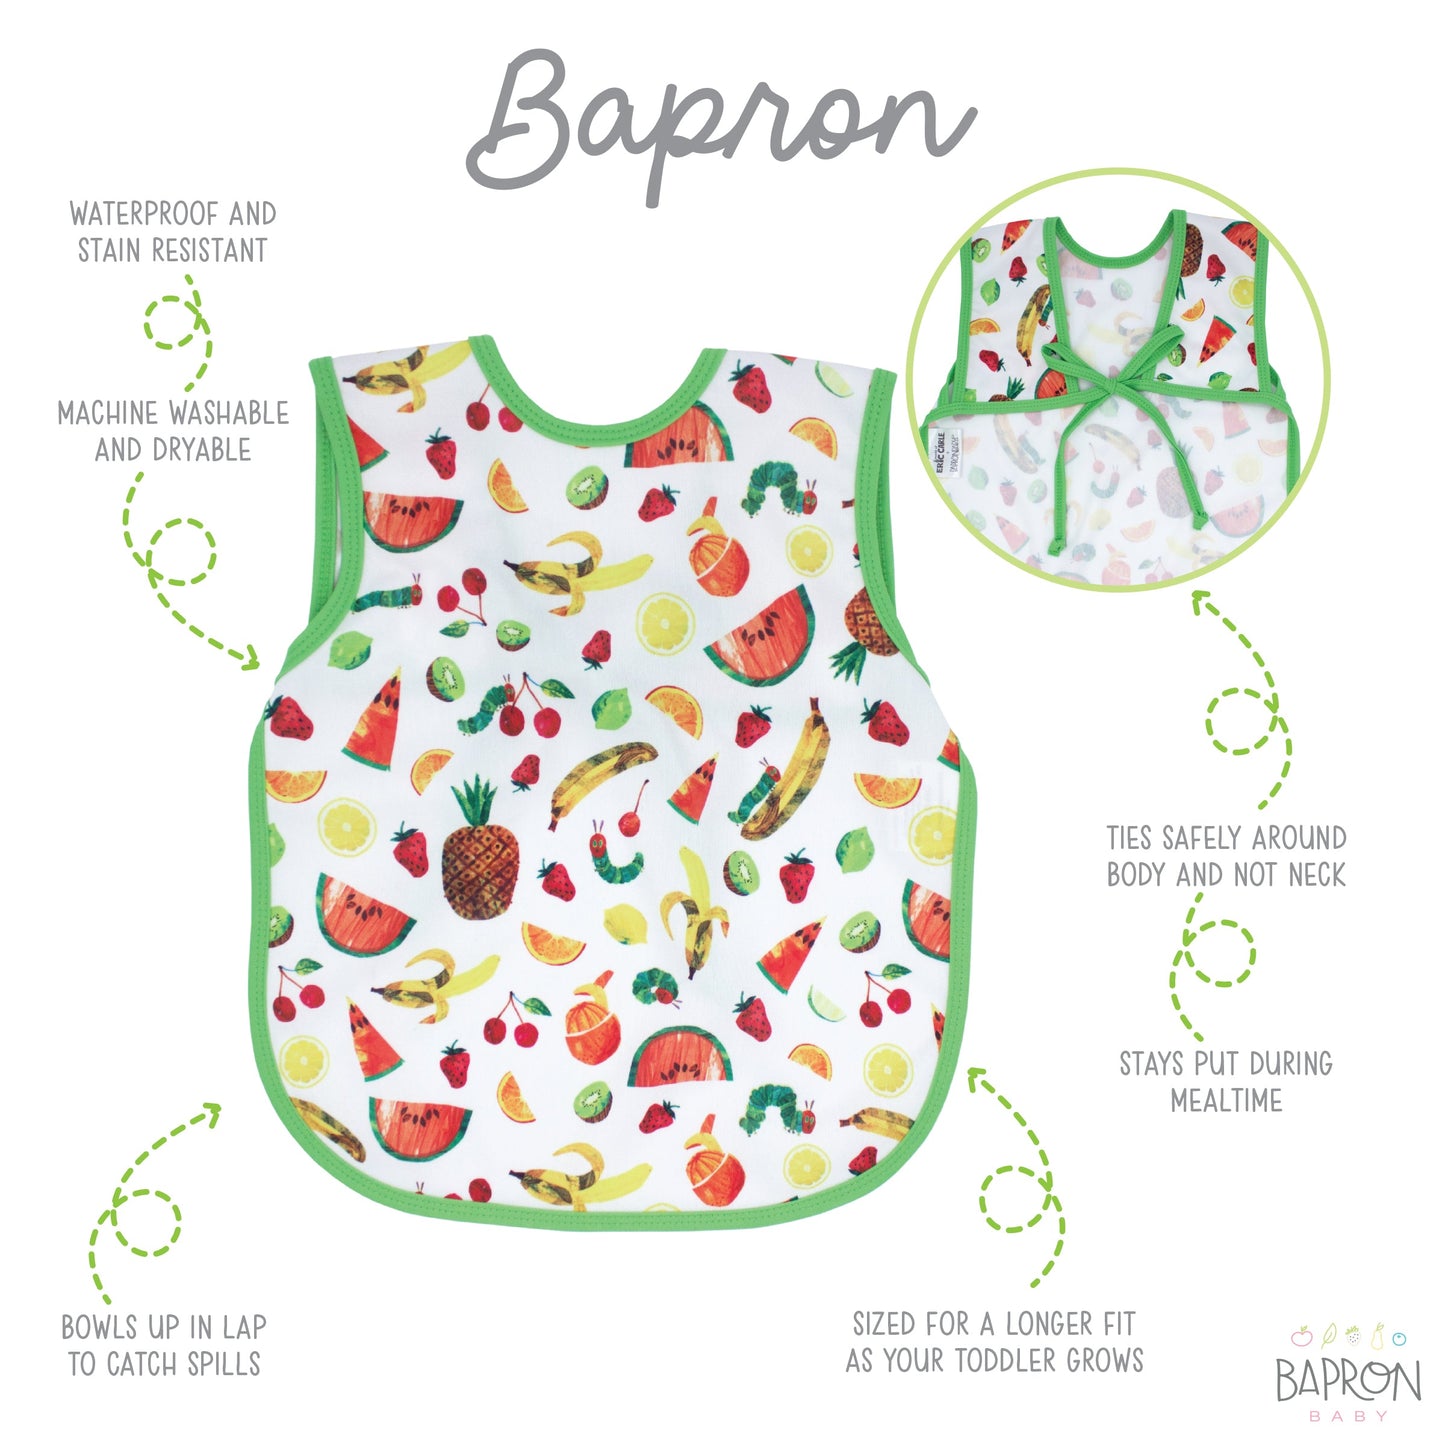 Tropical Fruit Bapron - from the World of Eric Carle - WERONE